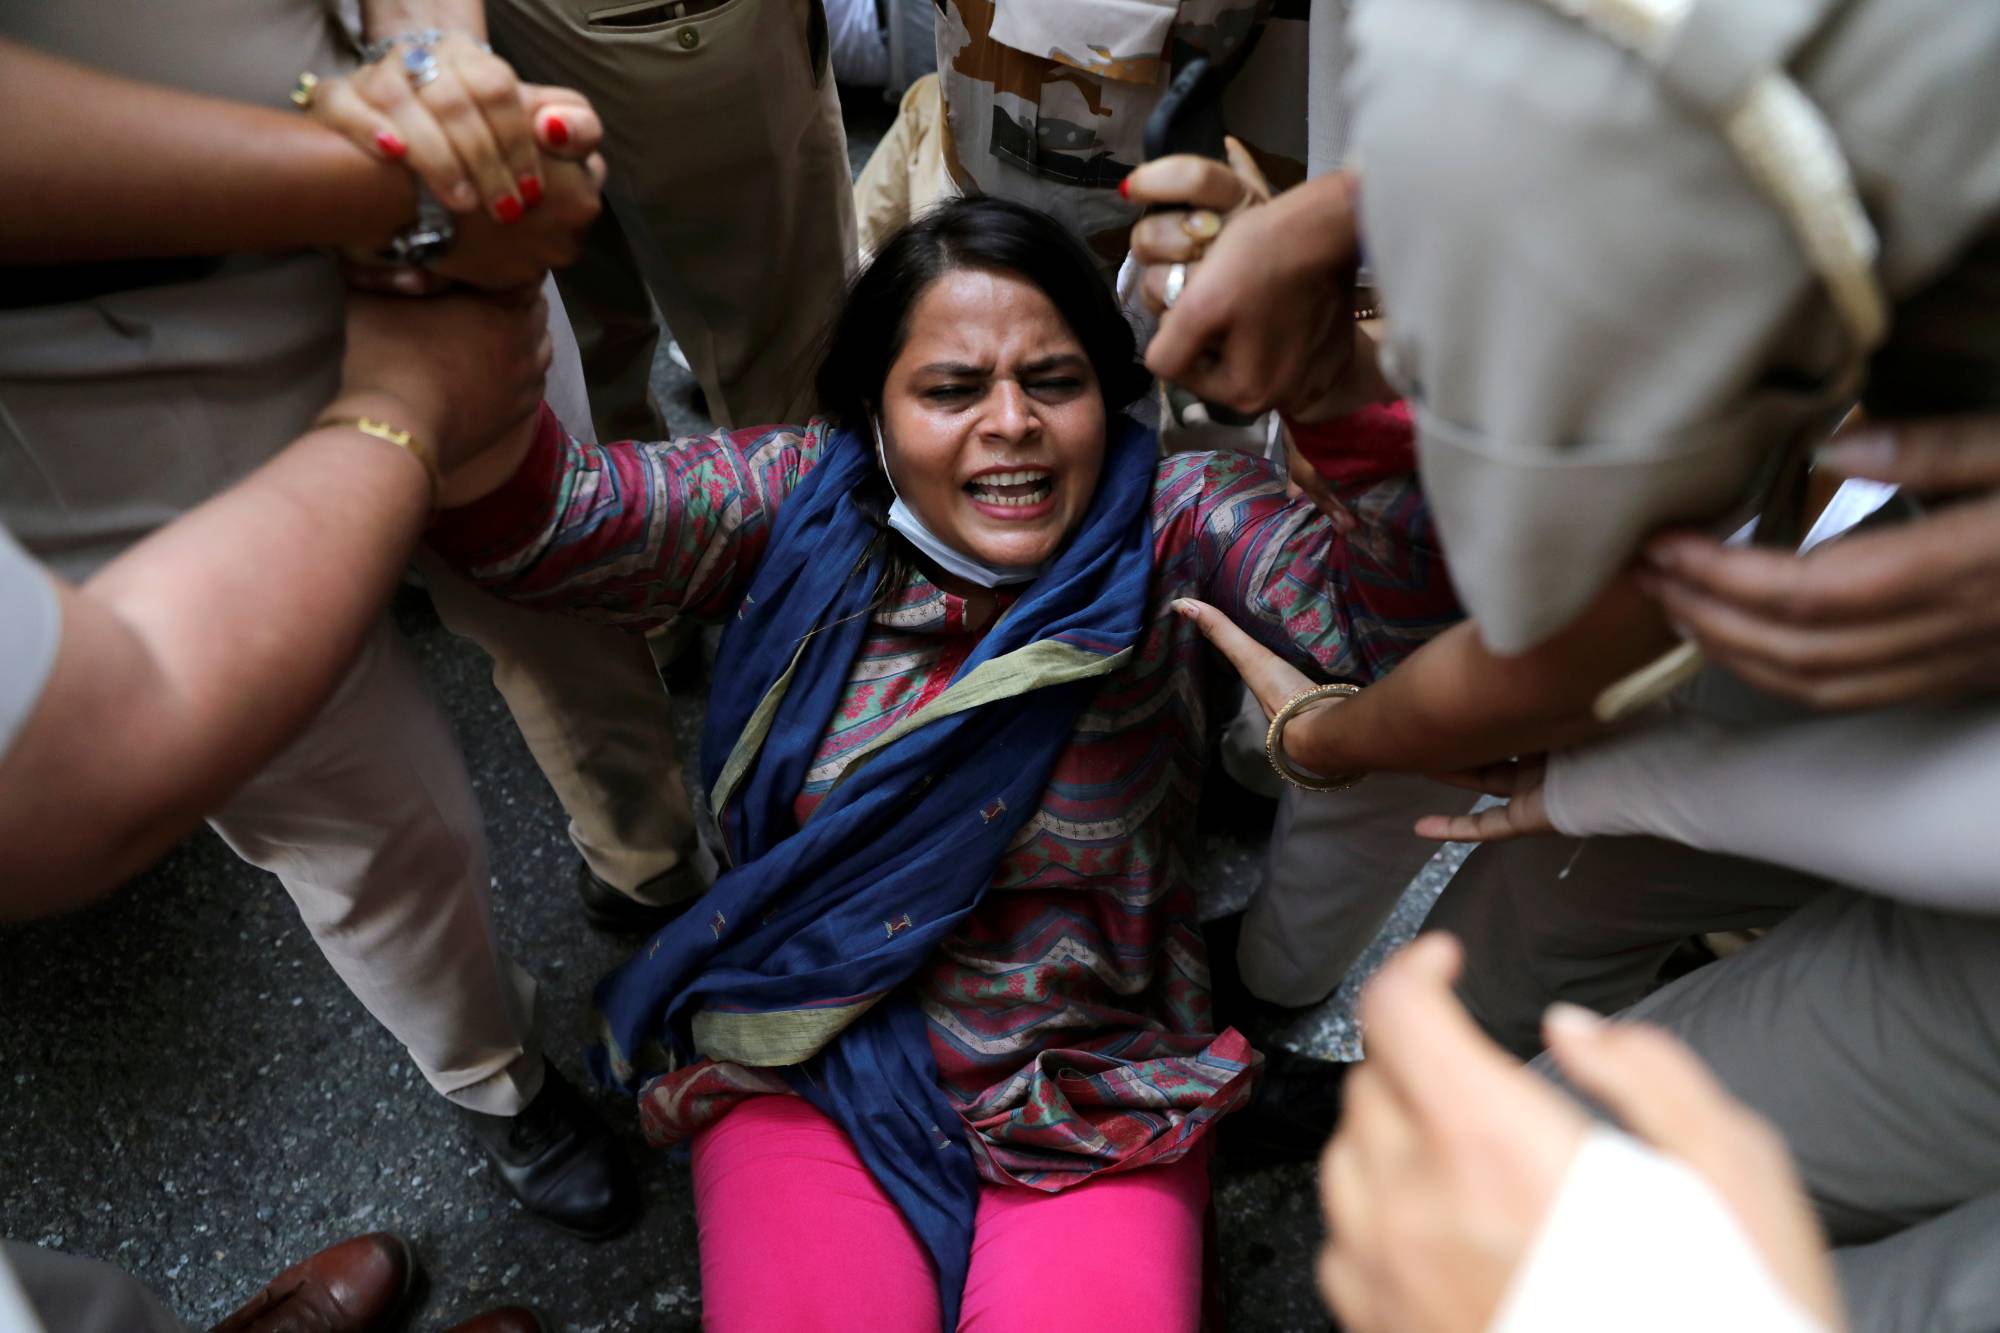 Woman dies in New Delhi after gang rape, fueling outrage again in India